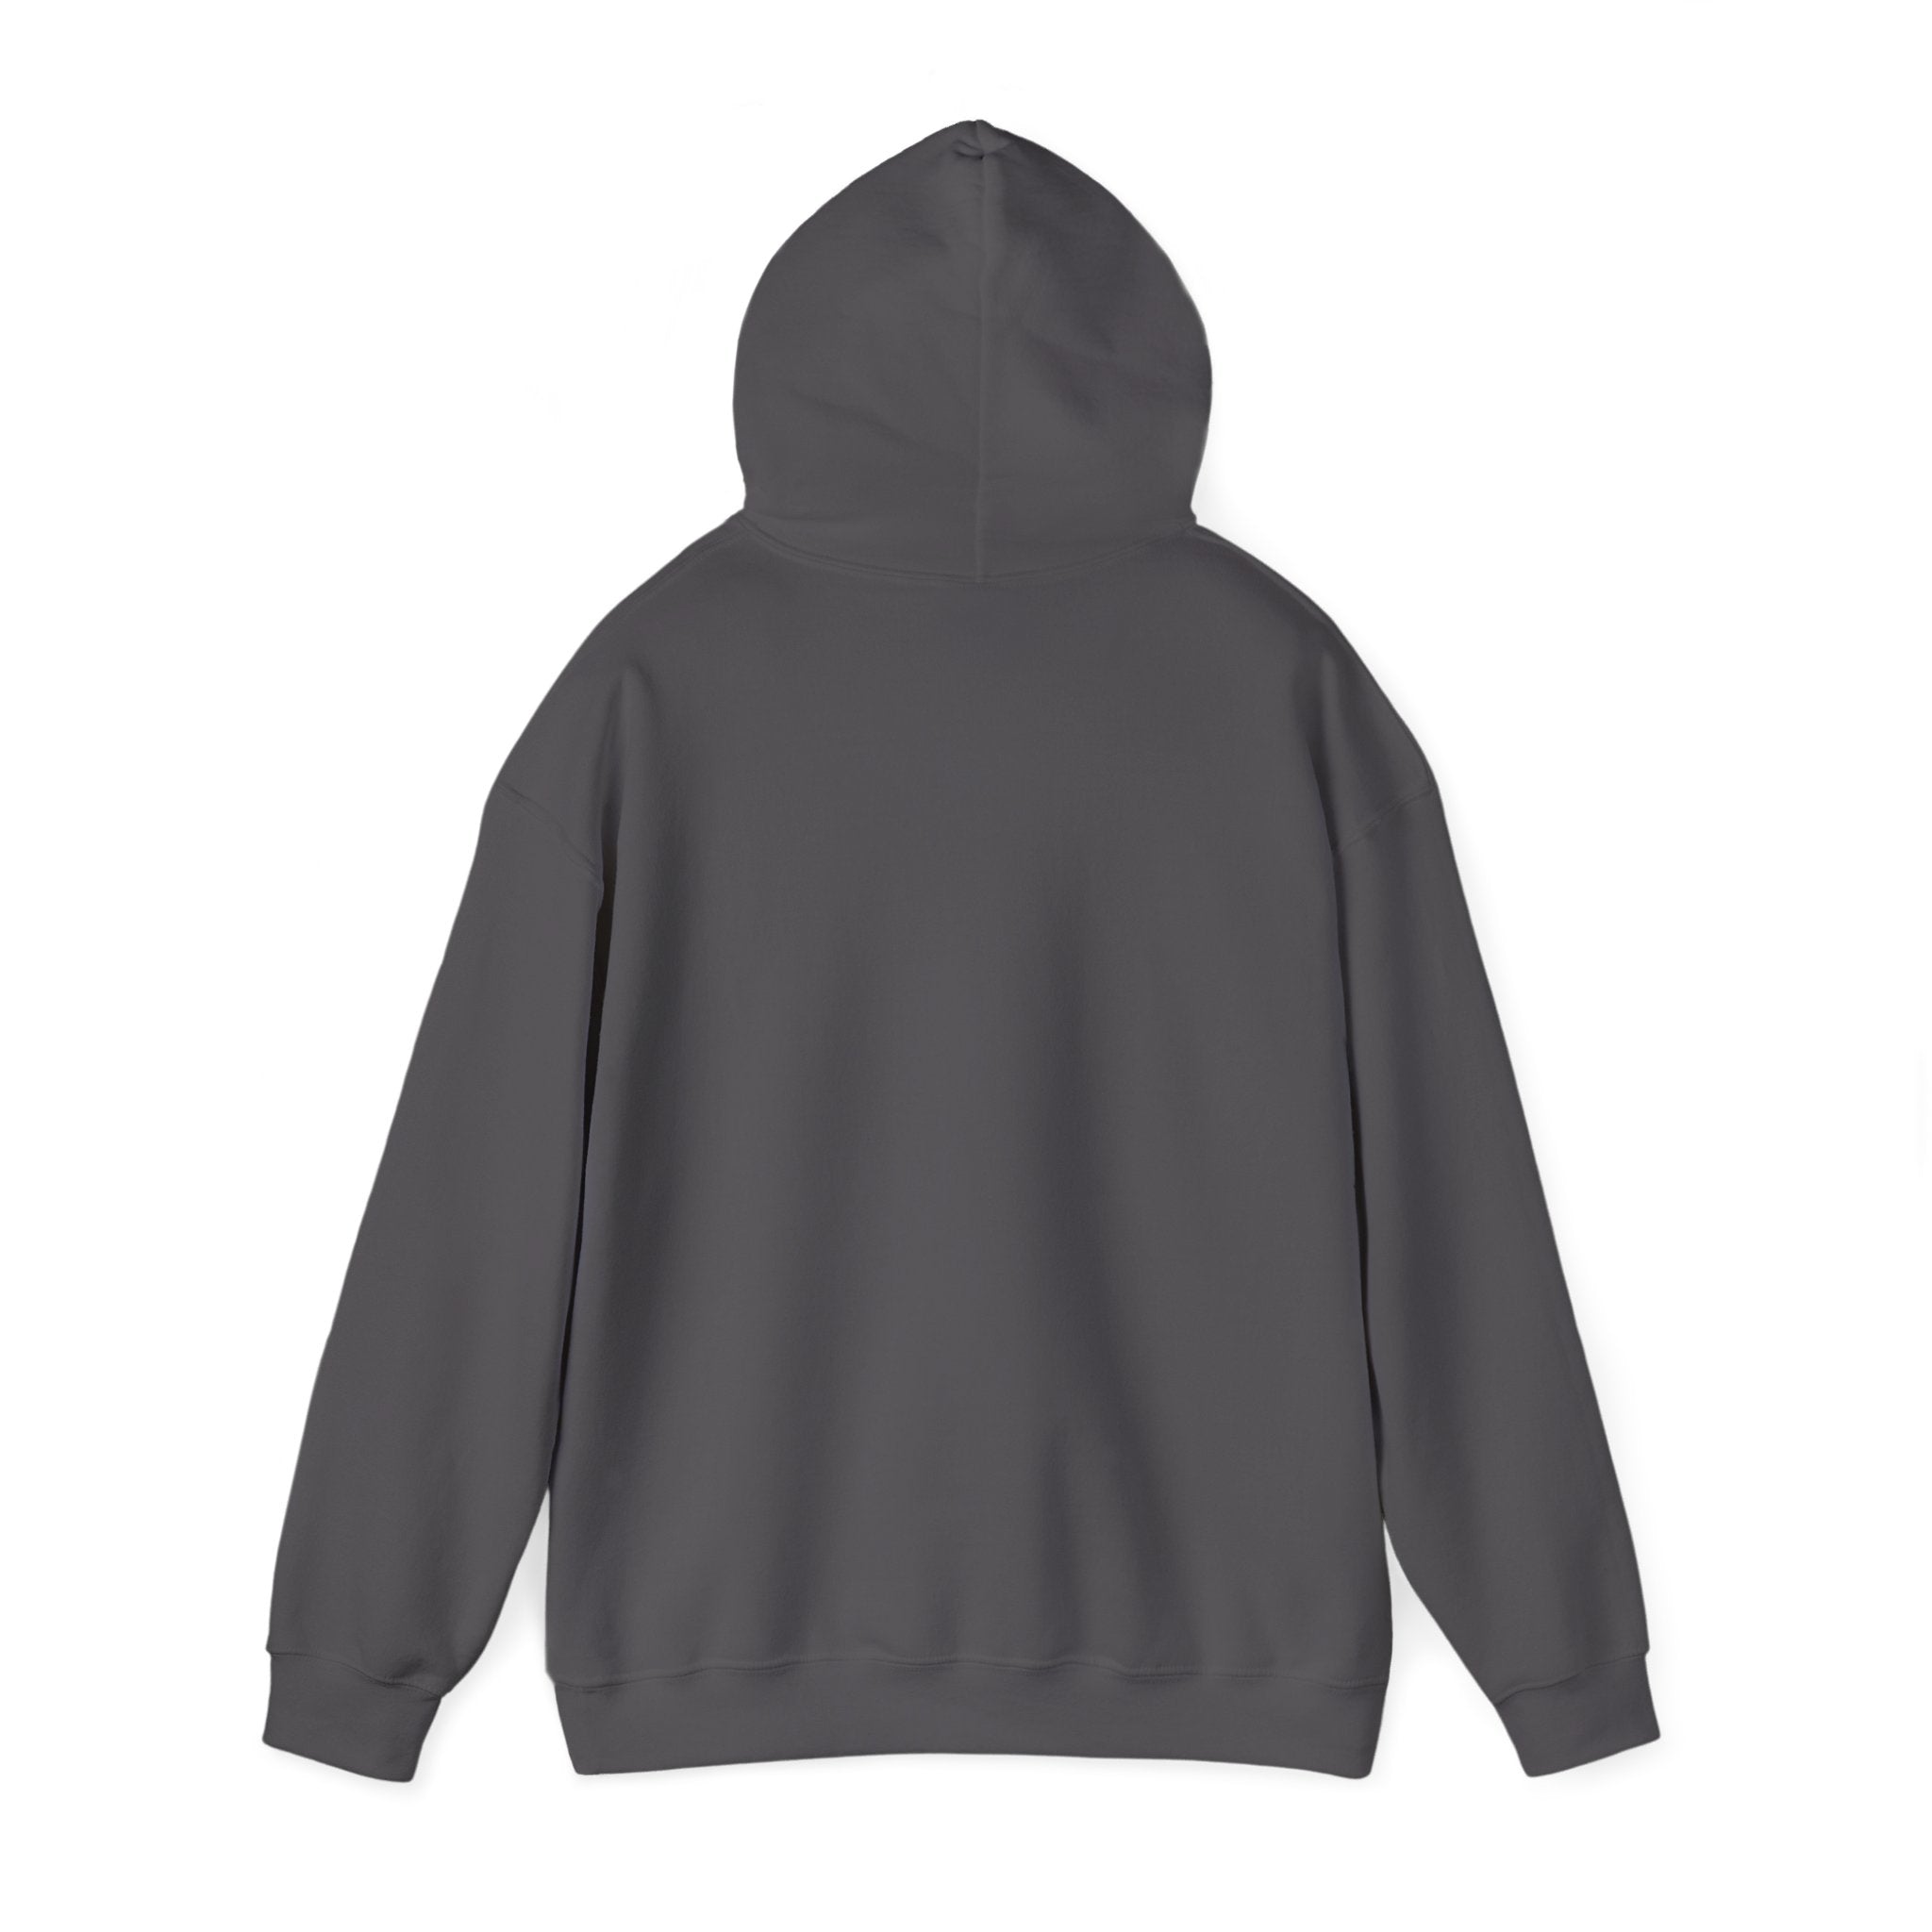 A back view of a plain, dark grey RU - Hooded Sweatshirt with long sleeves and ribbed cuffs, offering both comfort and style.